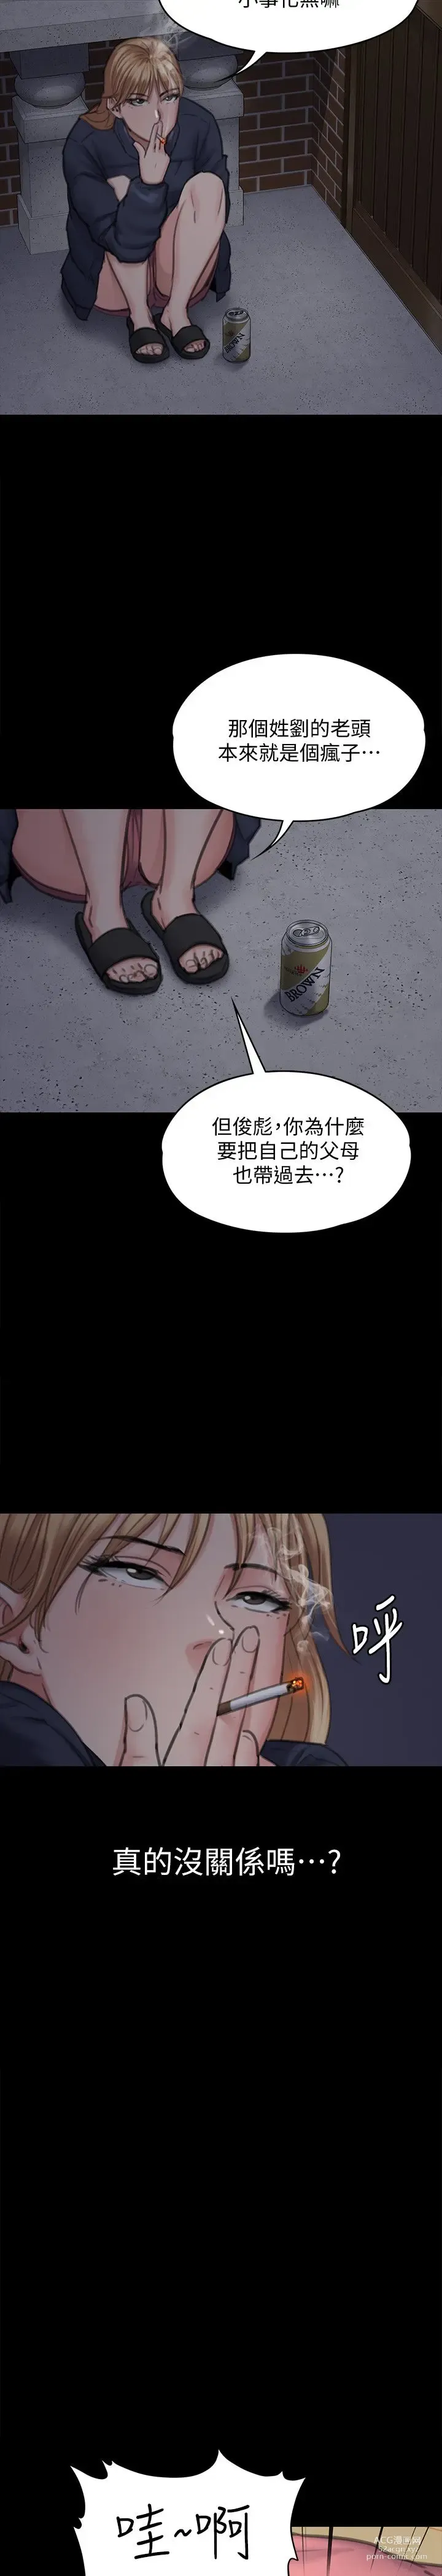 Page 1682 of manga 傀儡 Queen Bee 51-100